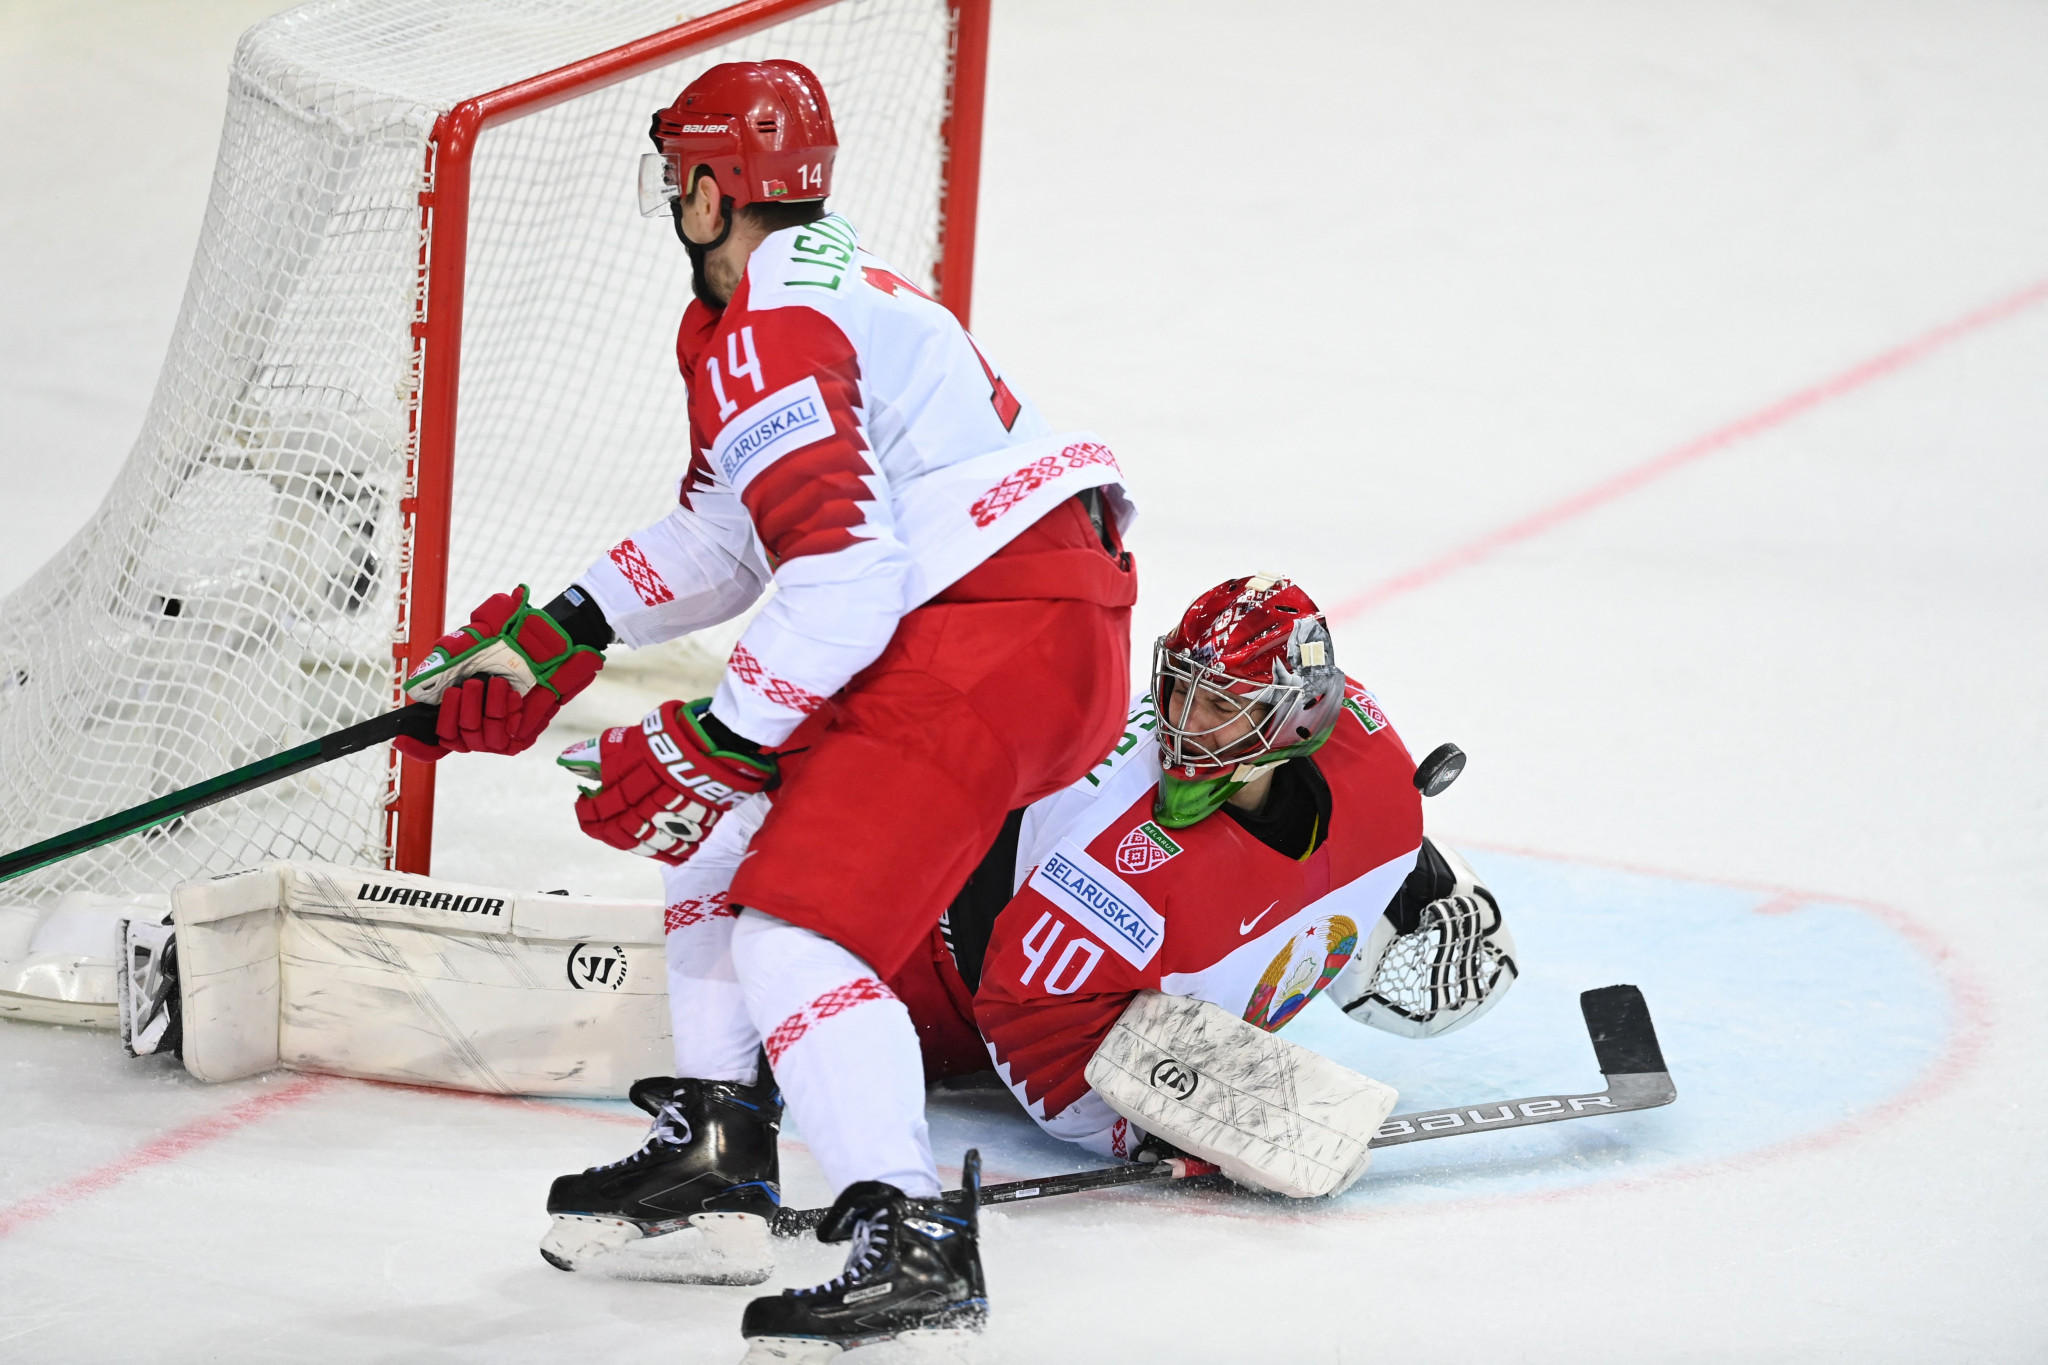 Russia and Belarus' national ice hockey teams have been banned from internaitonal competition since February last year due to the war in Ukraine ©Getty Images